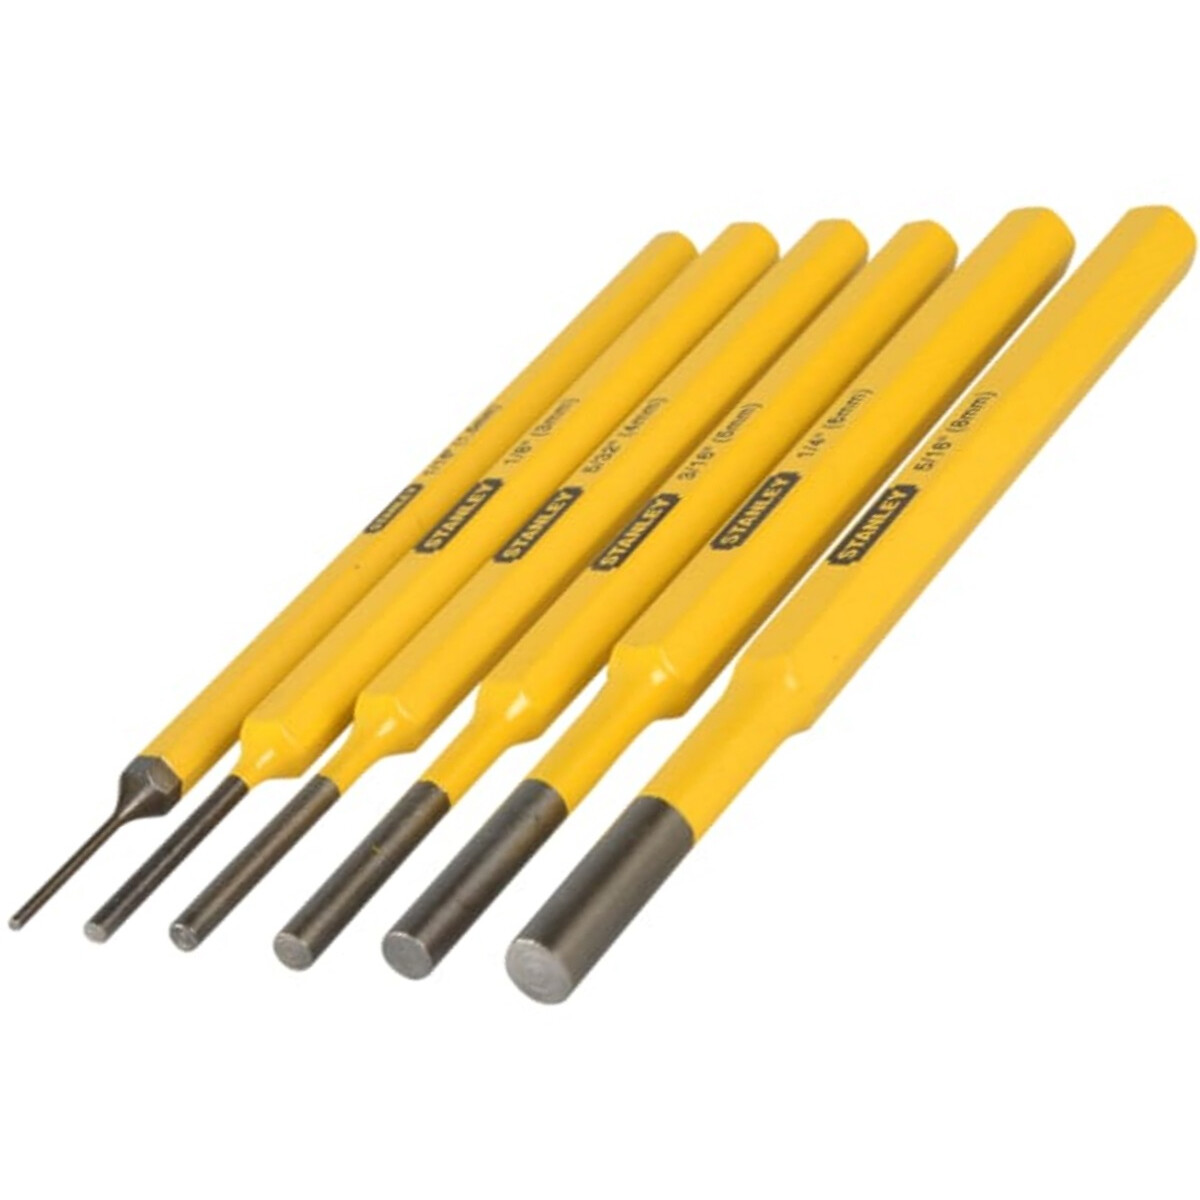 Stanley 16-226 6 Piece Punch Kit